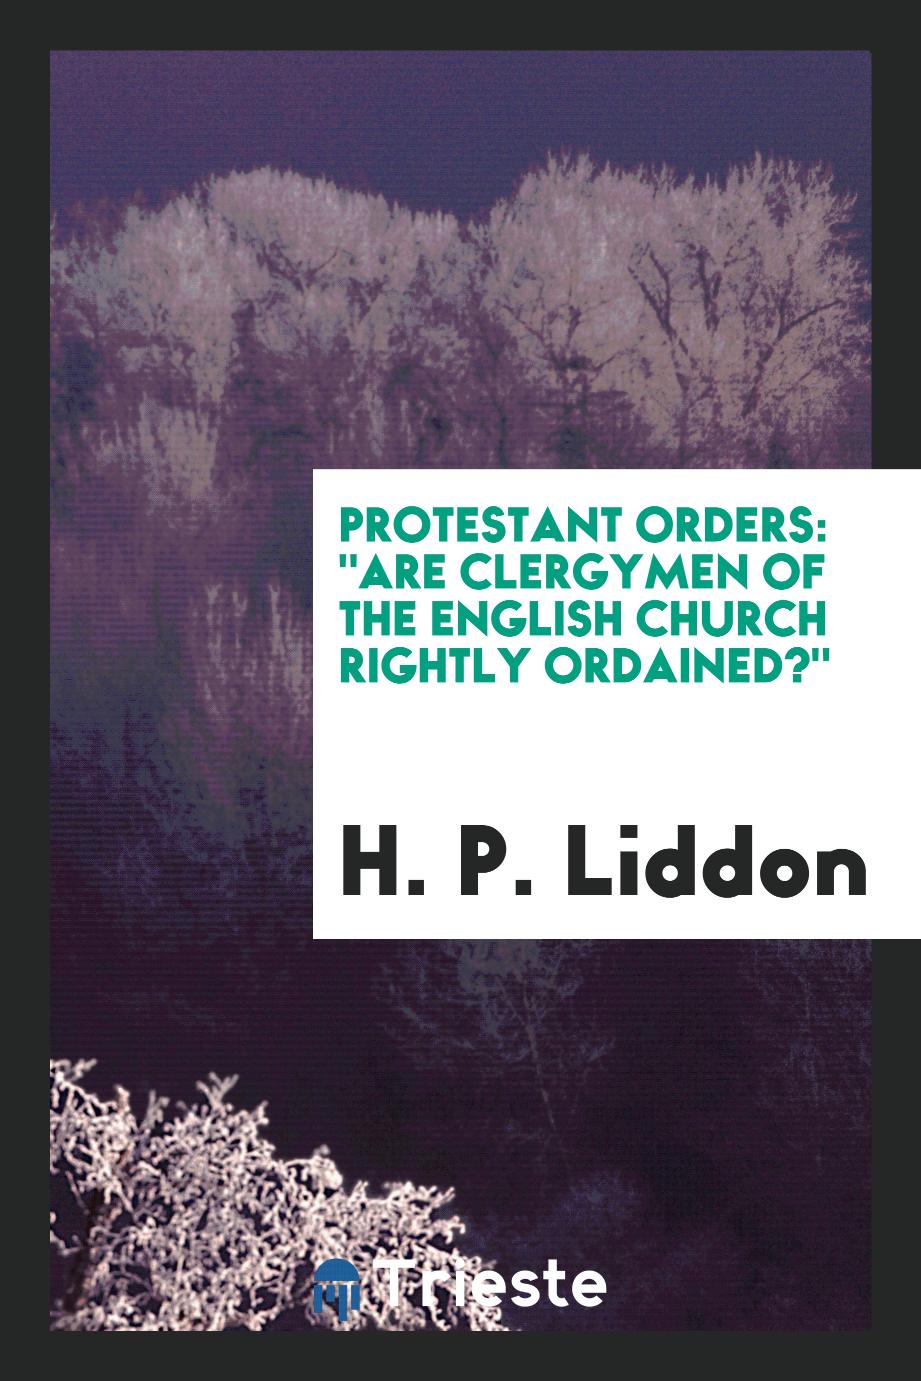 Protestant Orders: "Are Clergymen of the English Church Rightly Ordained?"